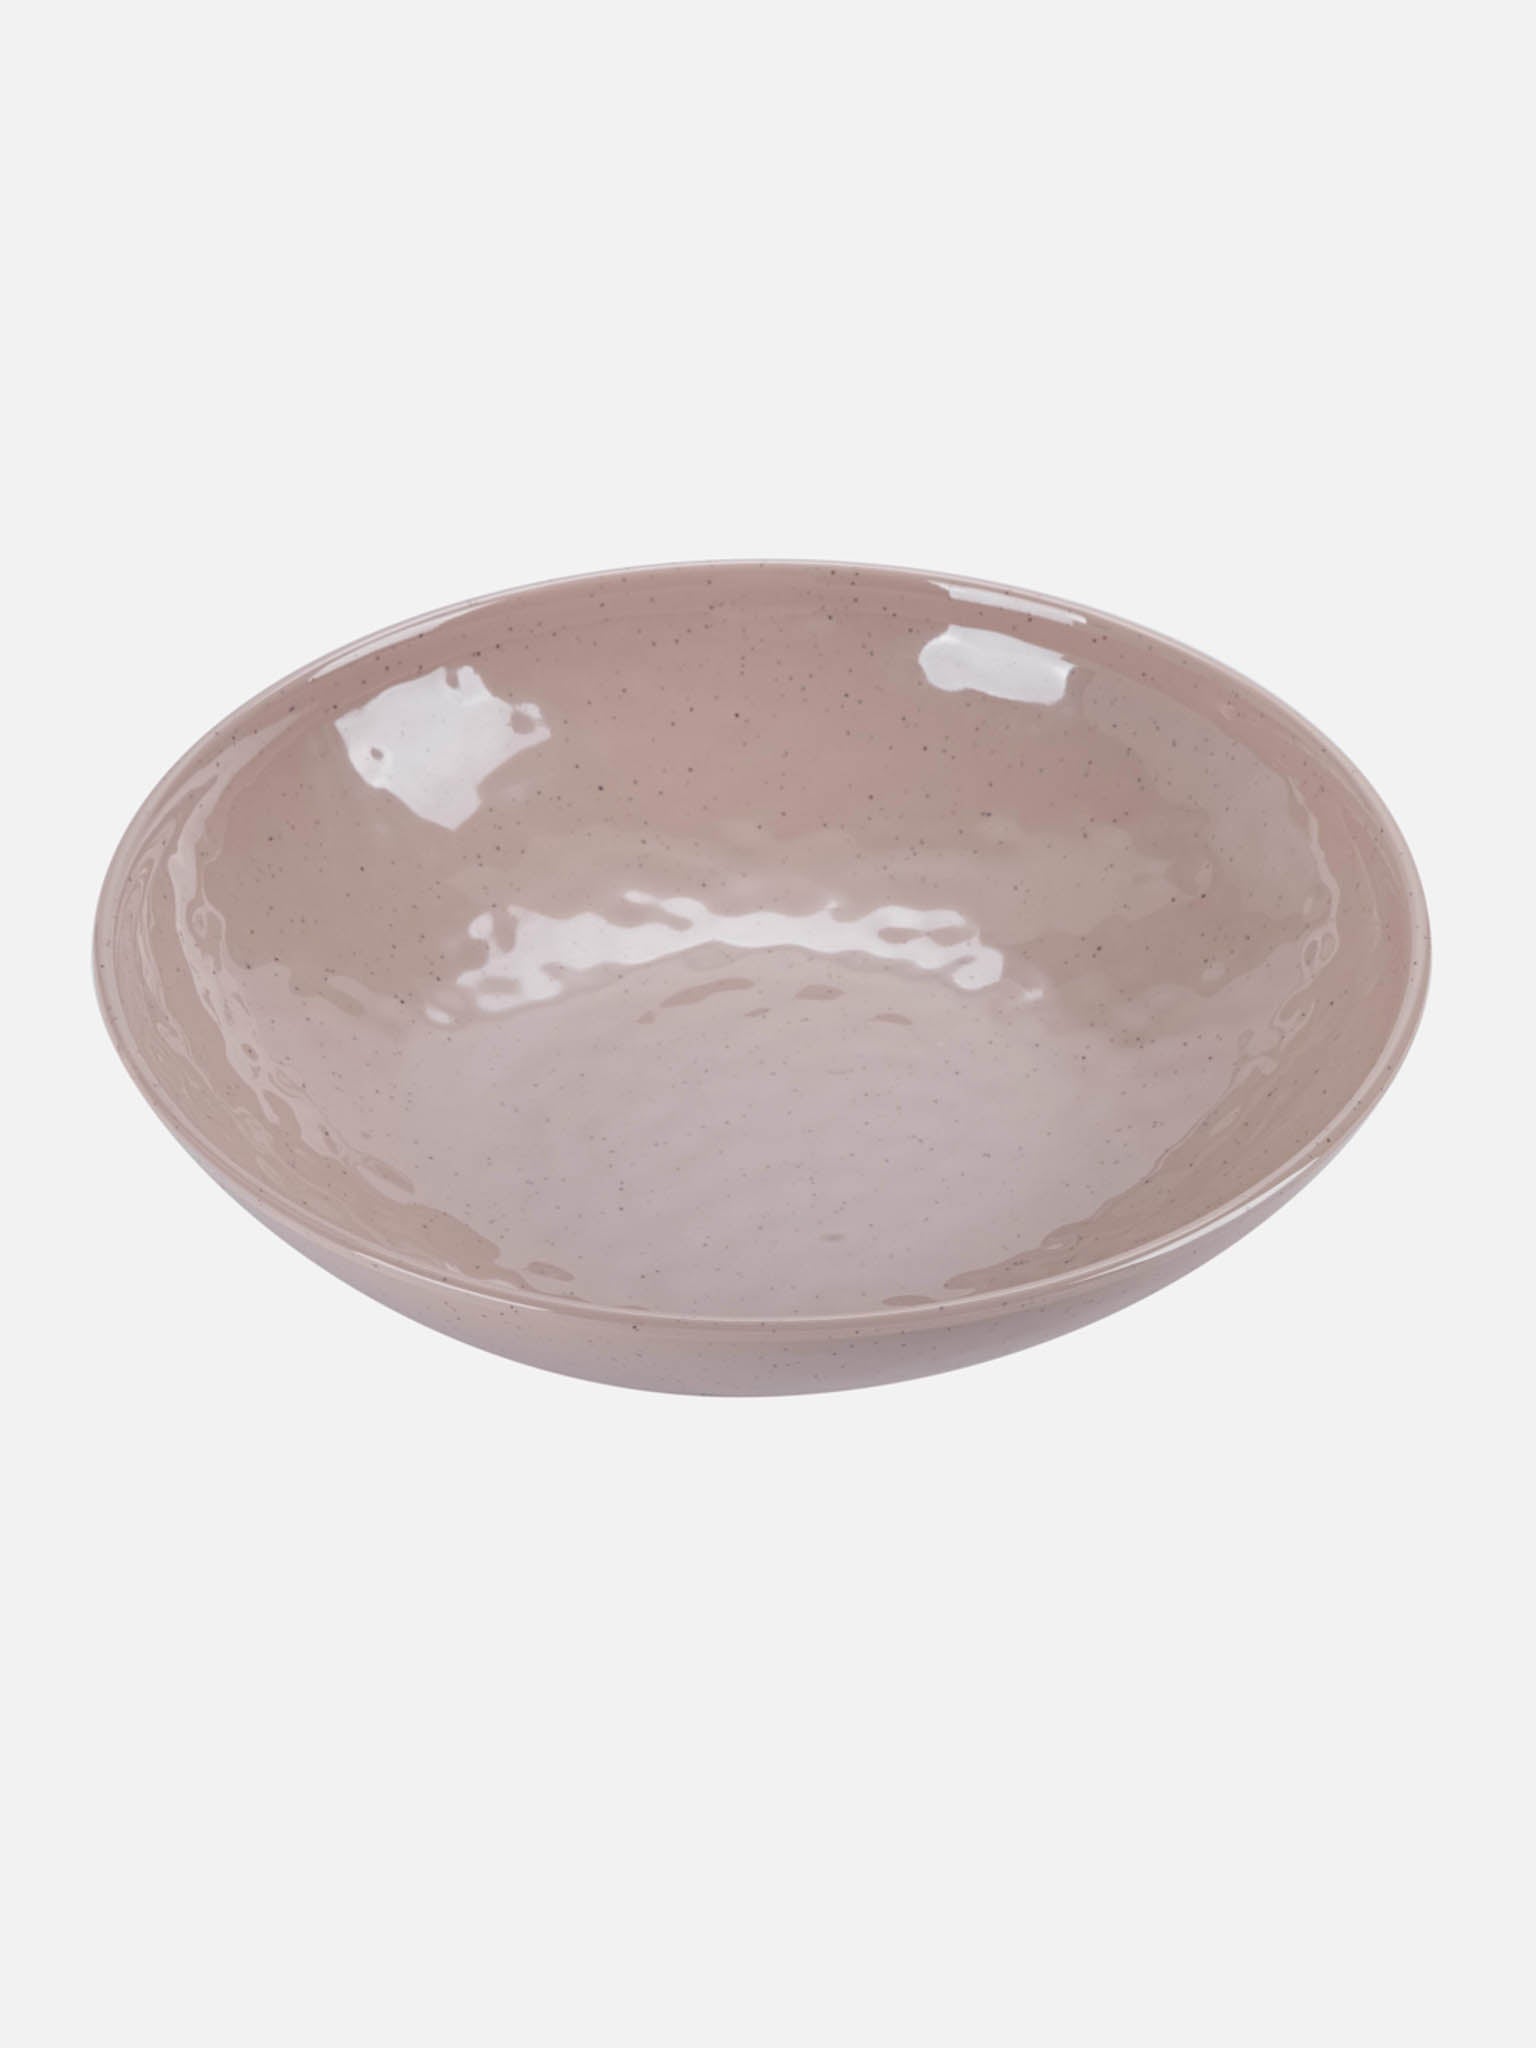 Daily Serving Bowl - large